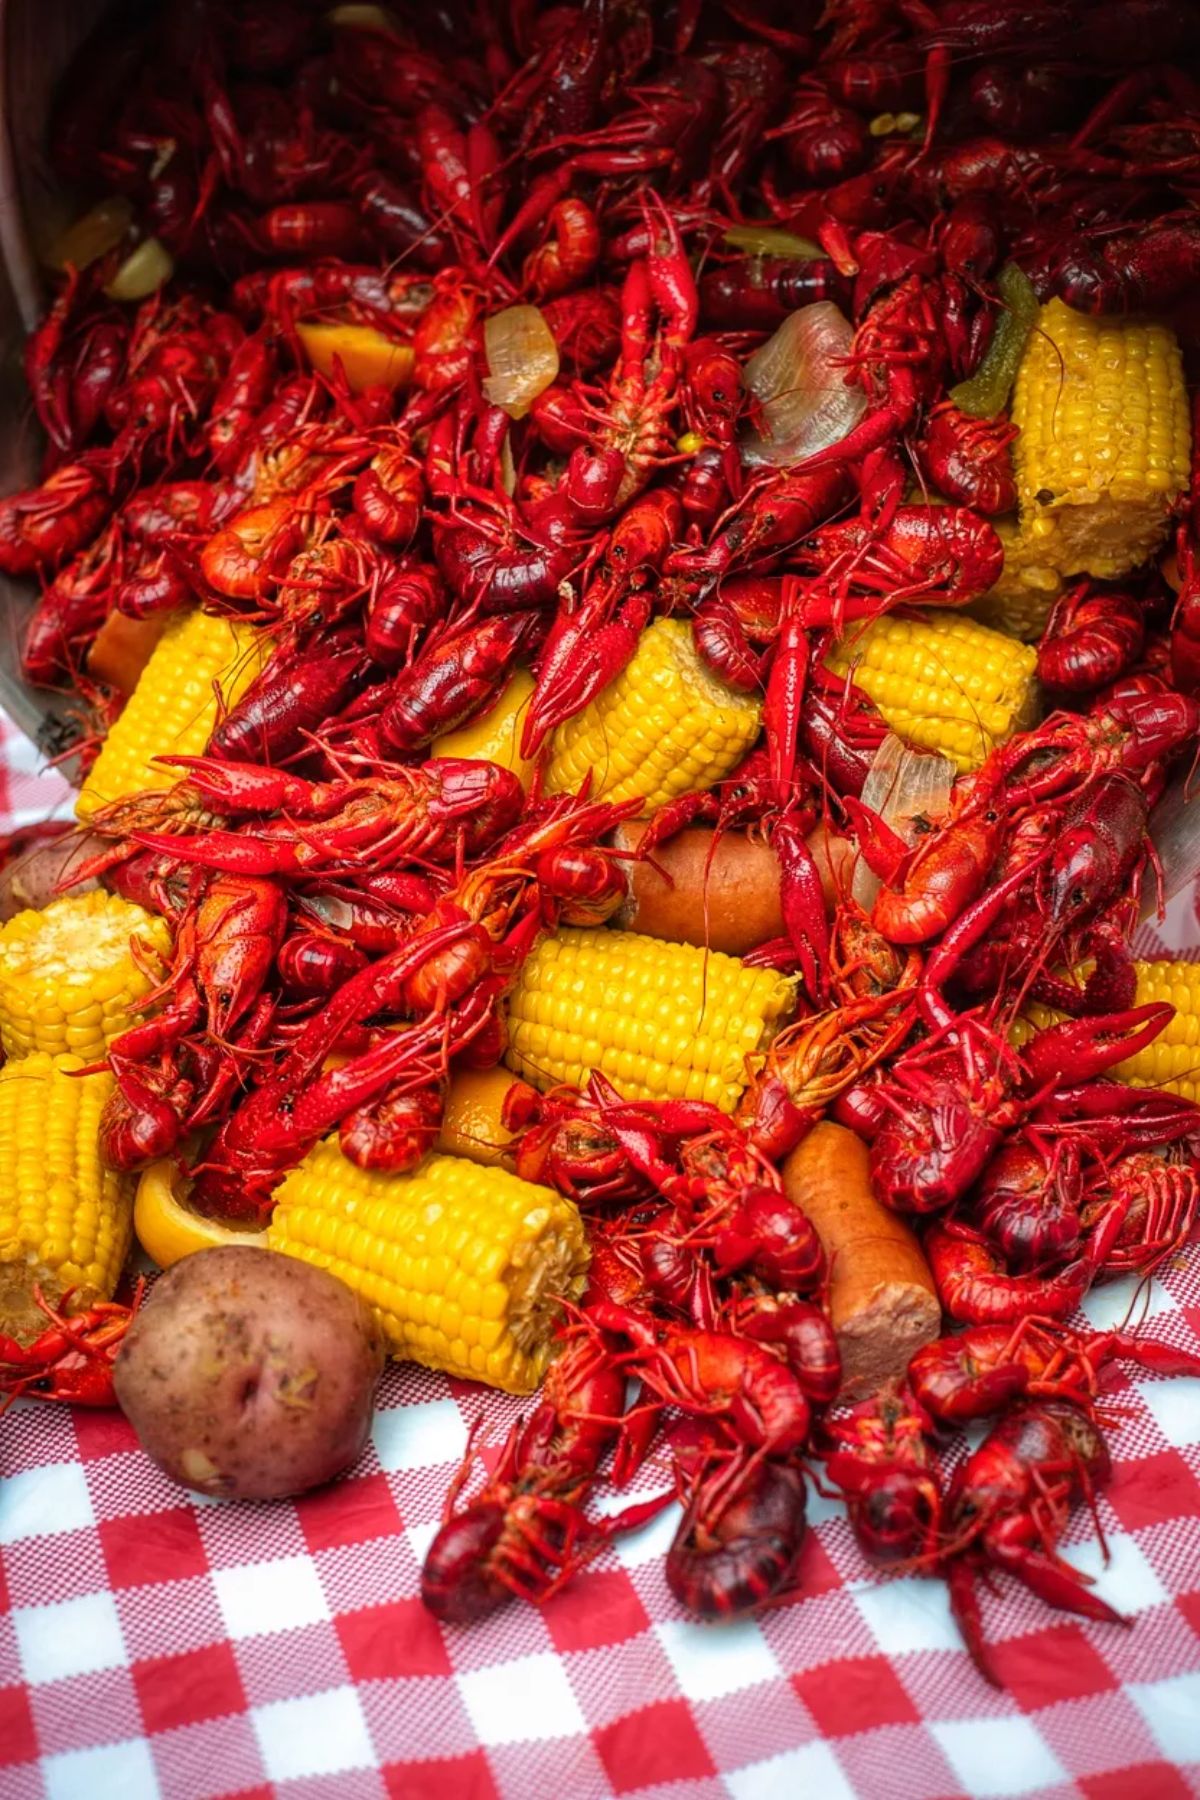 Scrumptious louisiana crawfish boil poured from a pot on a table.